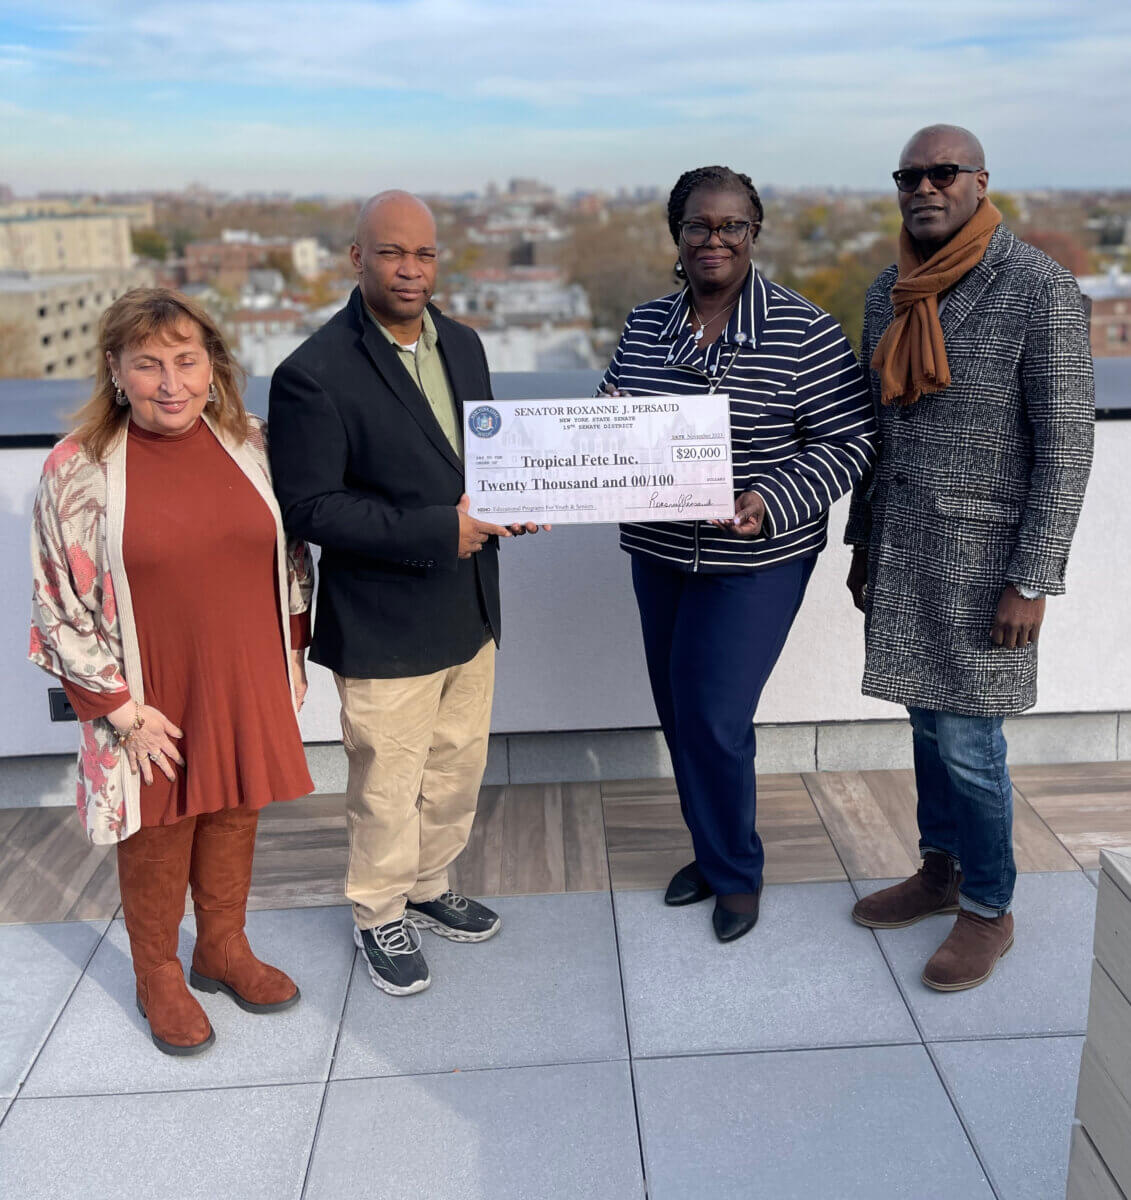 Senator Roxanne Persaud presenting a check for $20,000.00 to Mr. Alton Aimable - President, and two board members Keran Deterville and Patricia Meschin (left).